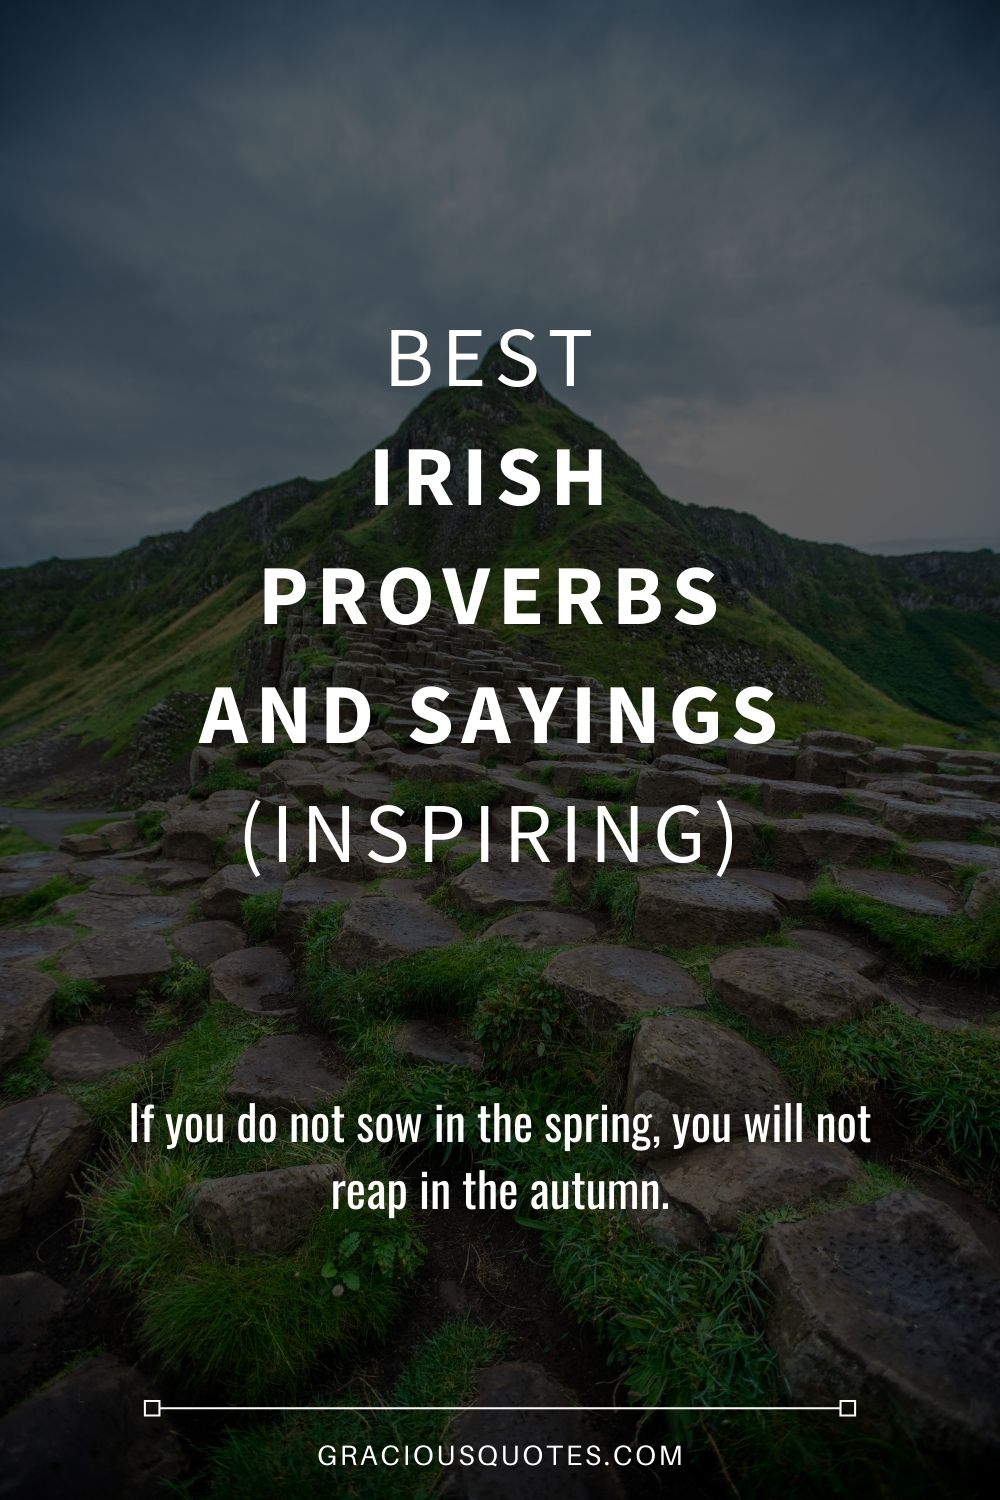 Best Irish Proverbs and Sayings (INSPIRING) - Gracious Quotes